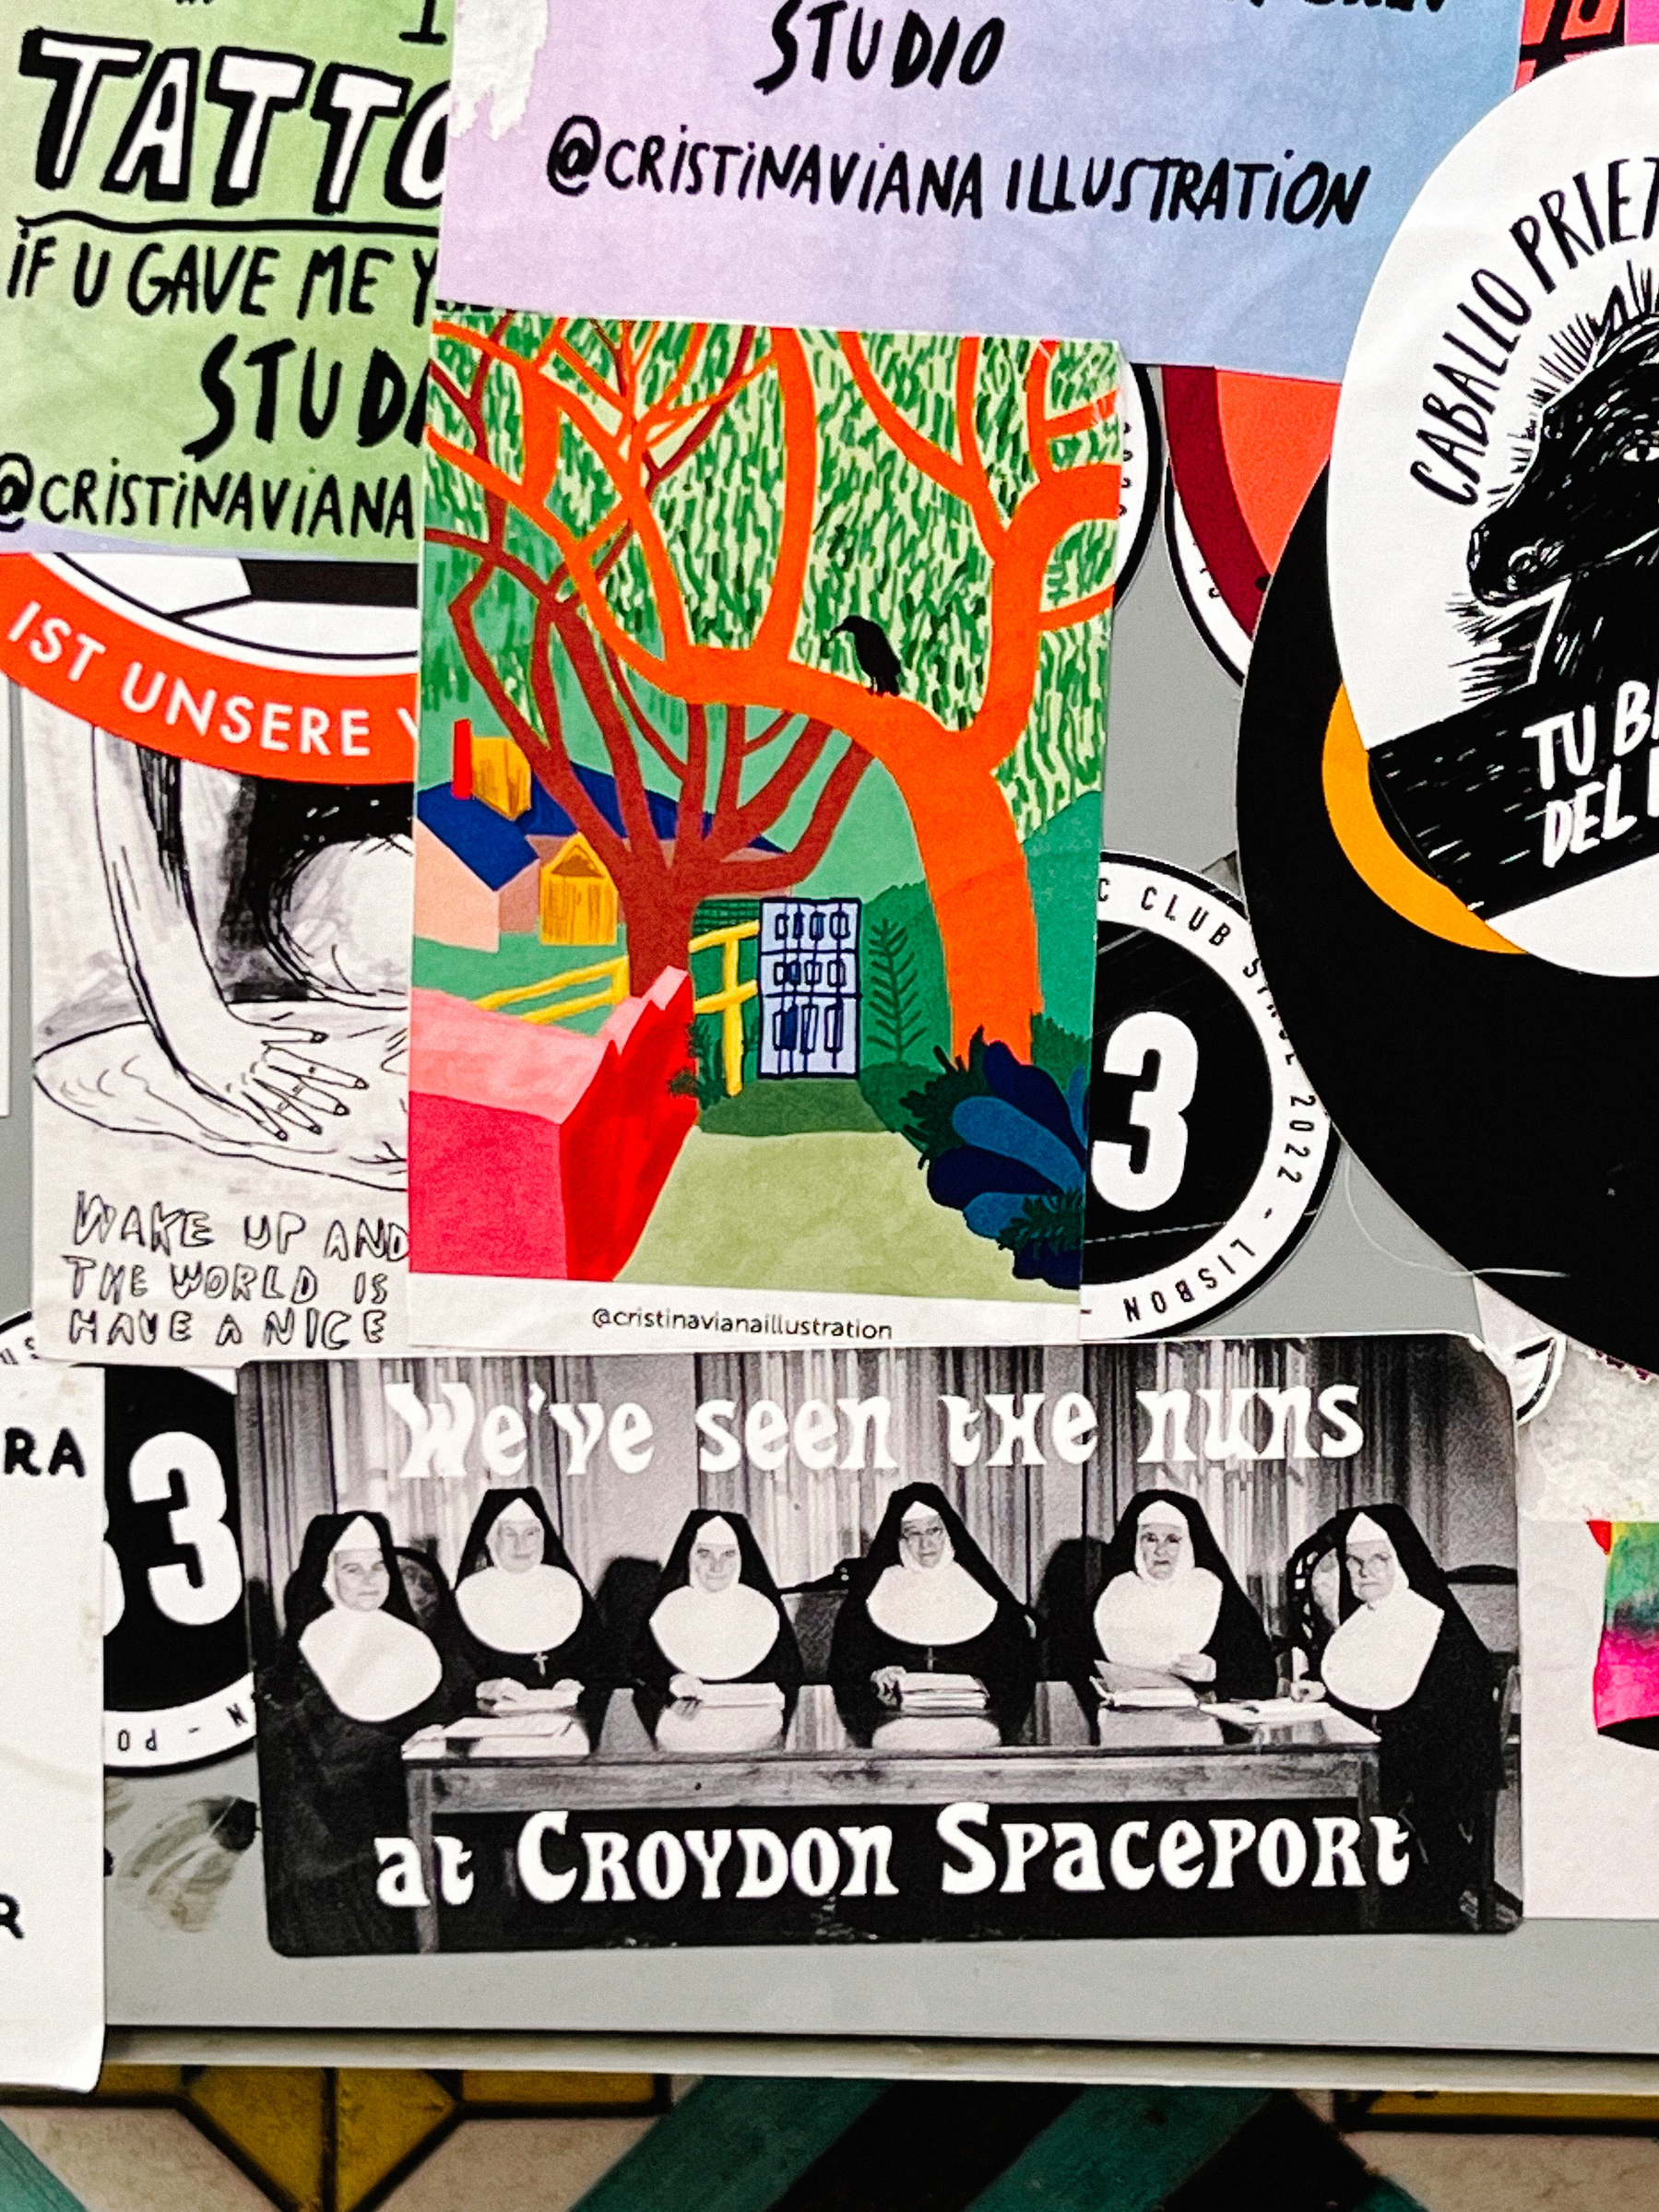 Several stickers, including one with a black and white photo of nuns sitting down at a table, and the words “We&rsquo;ve seen the nuns at Croydon Spaceport&quot;. 